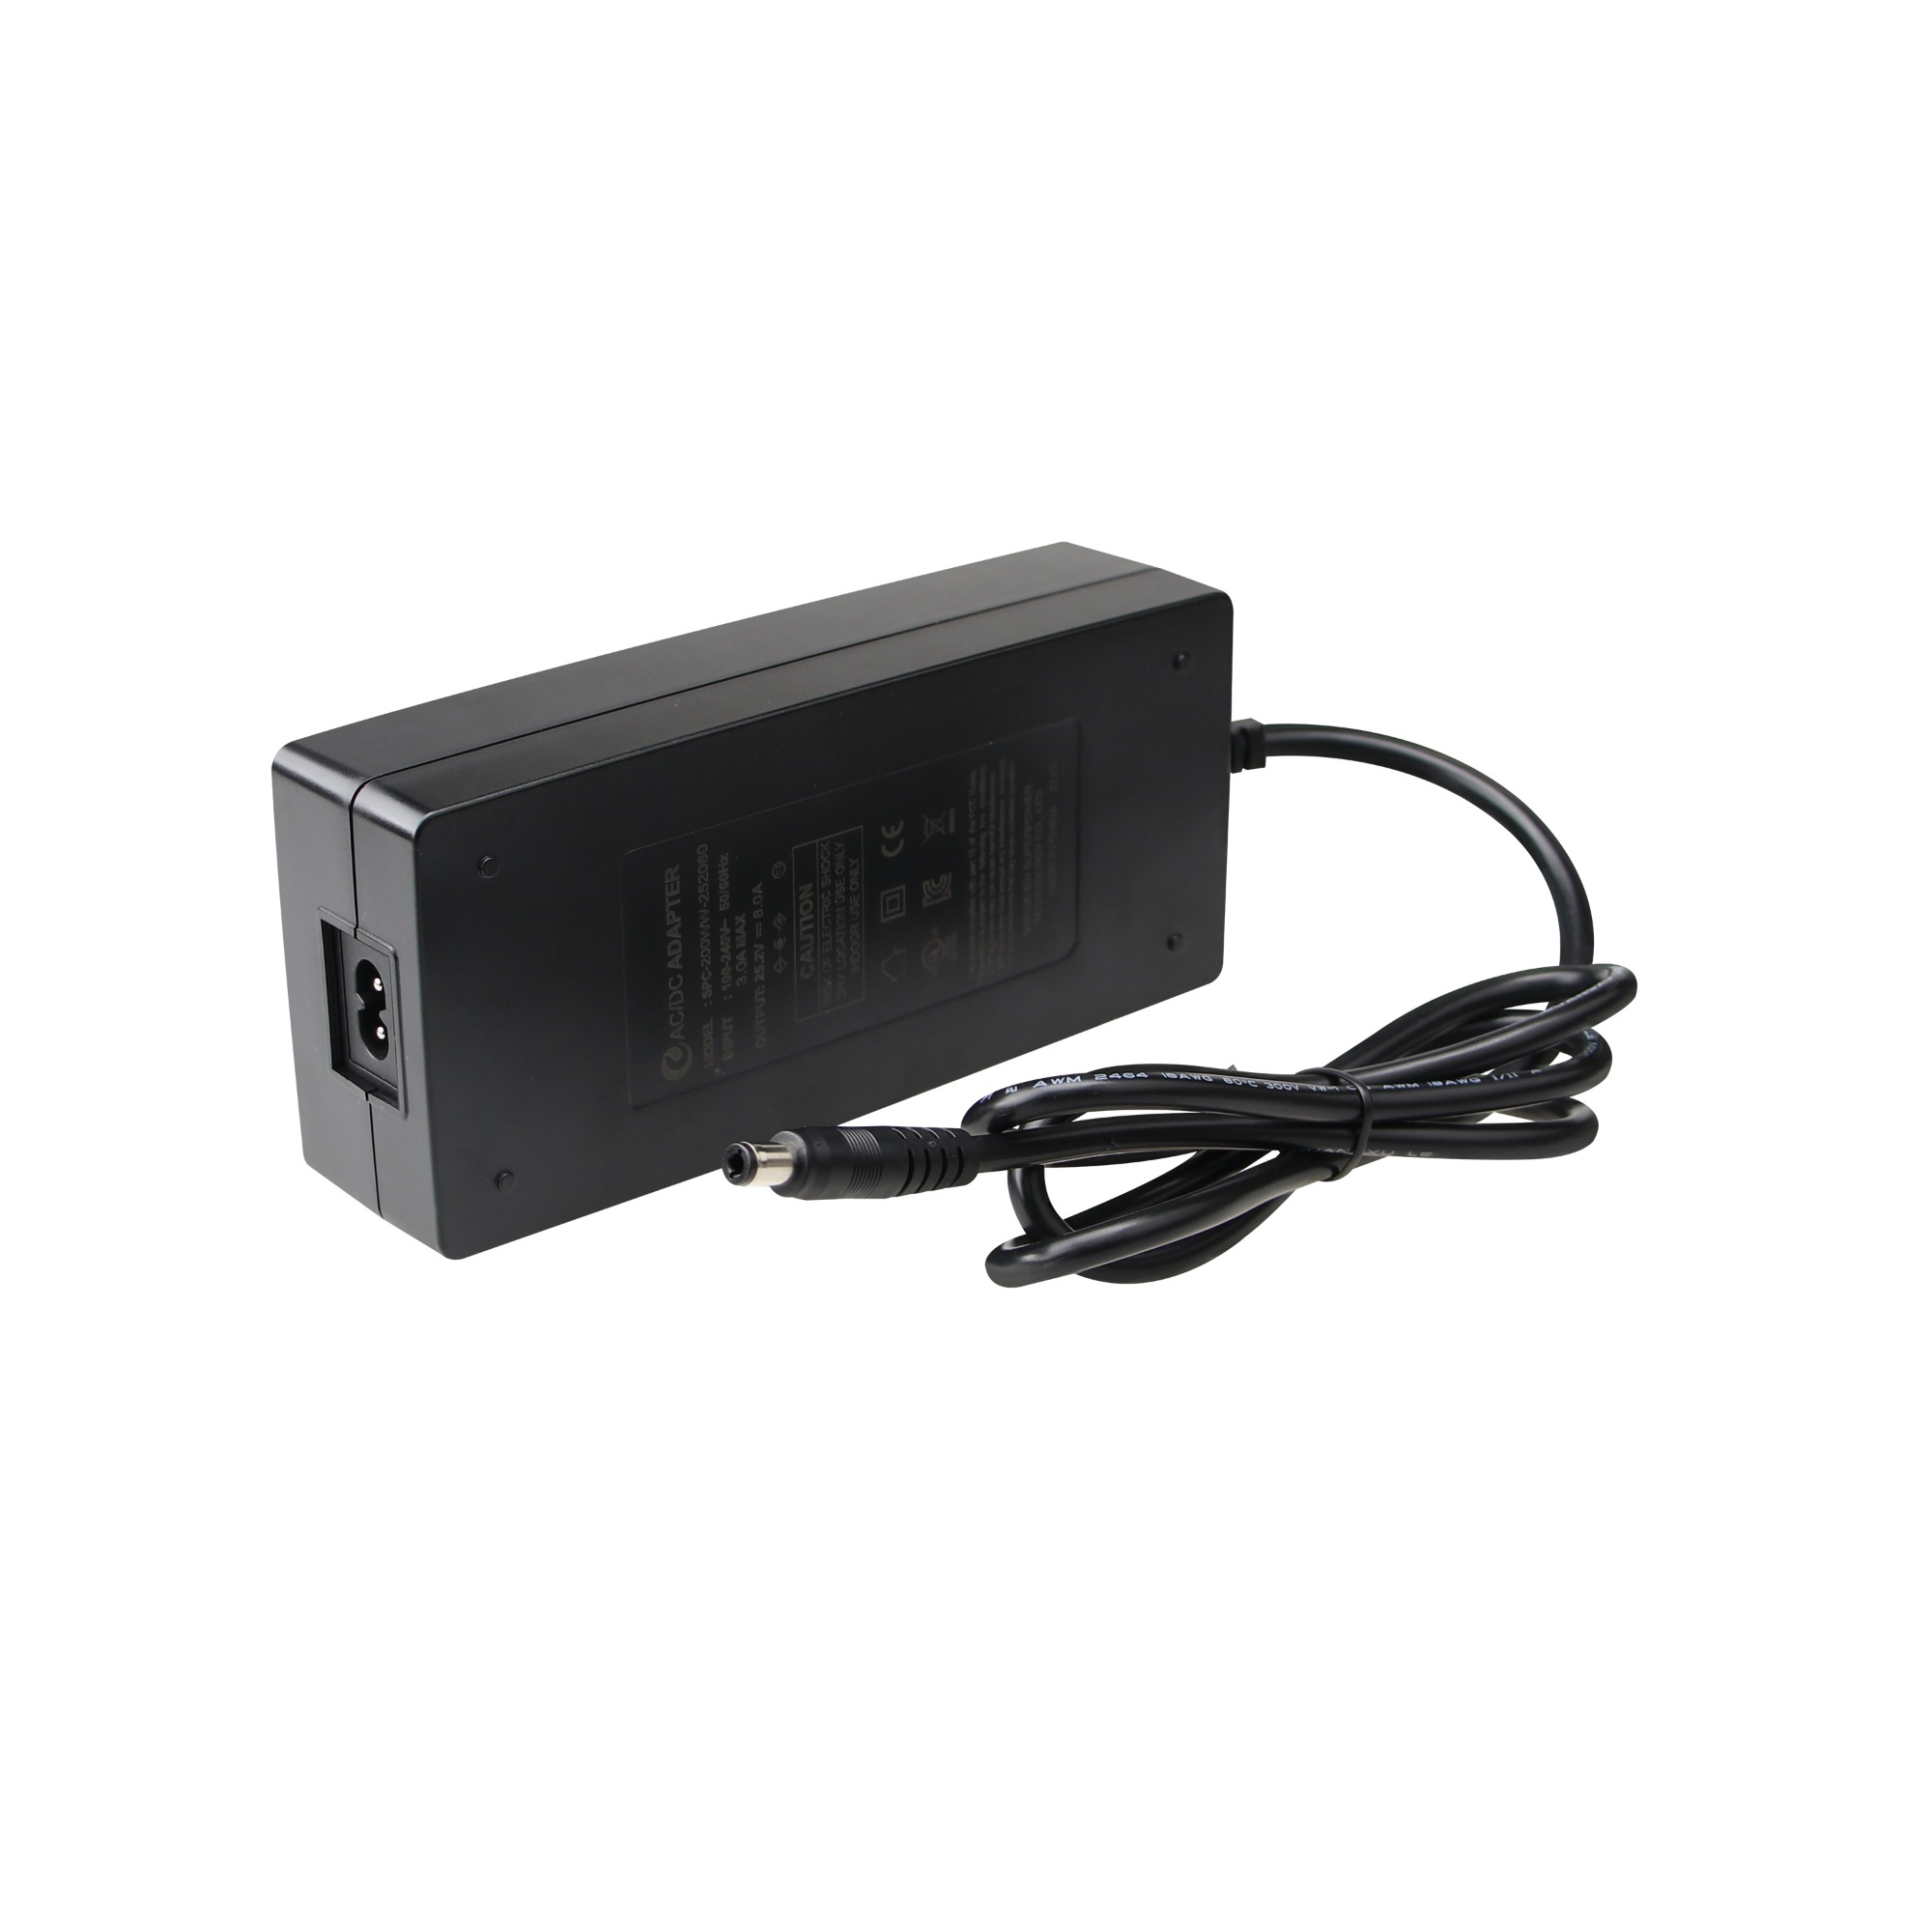 Smart charger 54.6V 2A Lithium battery charger For 48V 13S Li-ion Battery charger Electric Scooter E-bike motorcycle